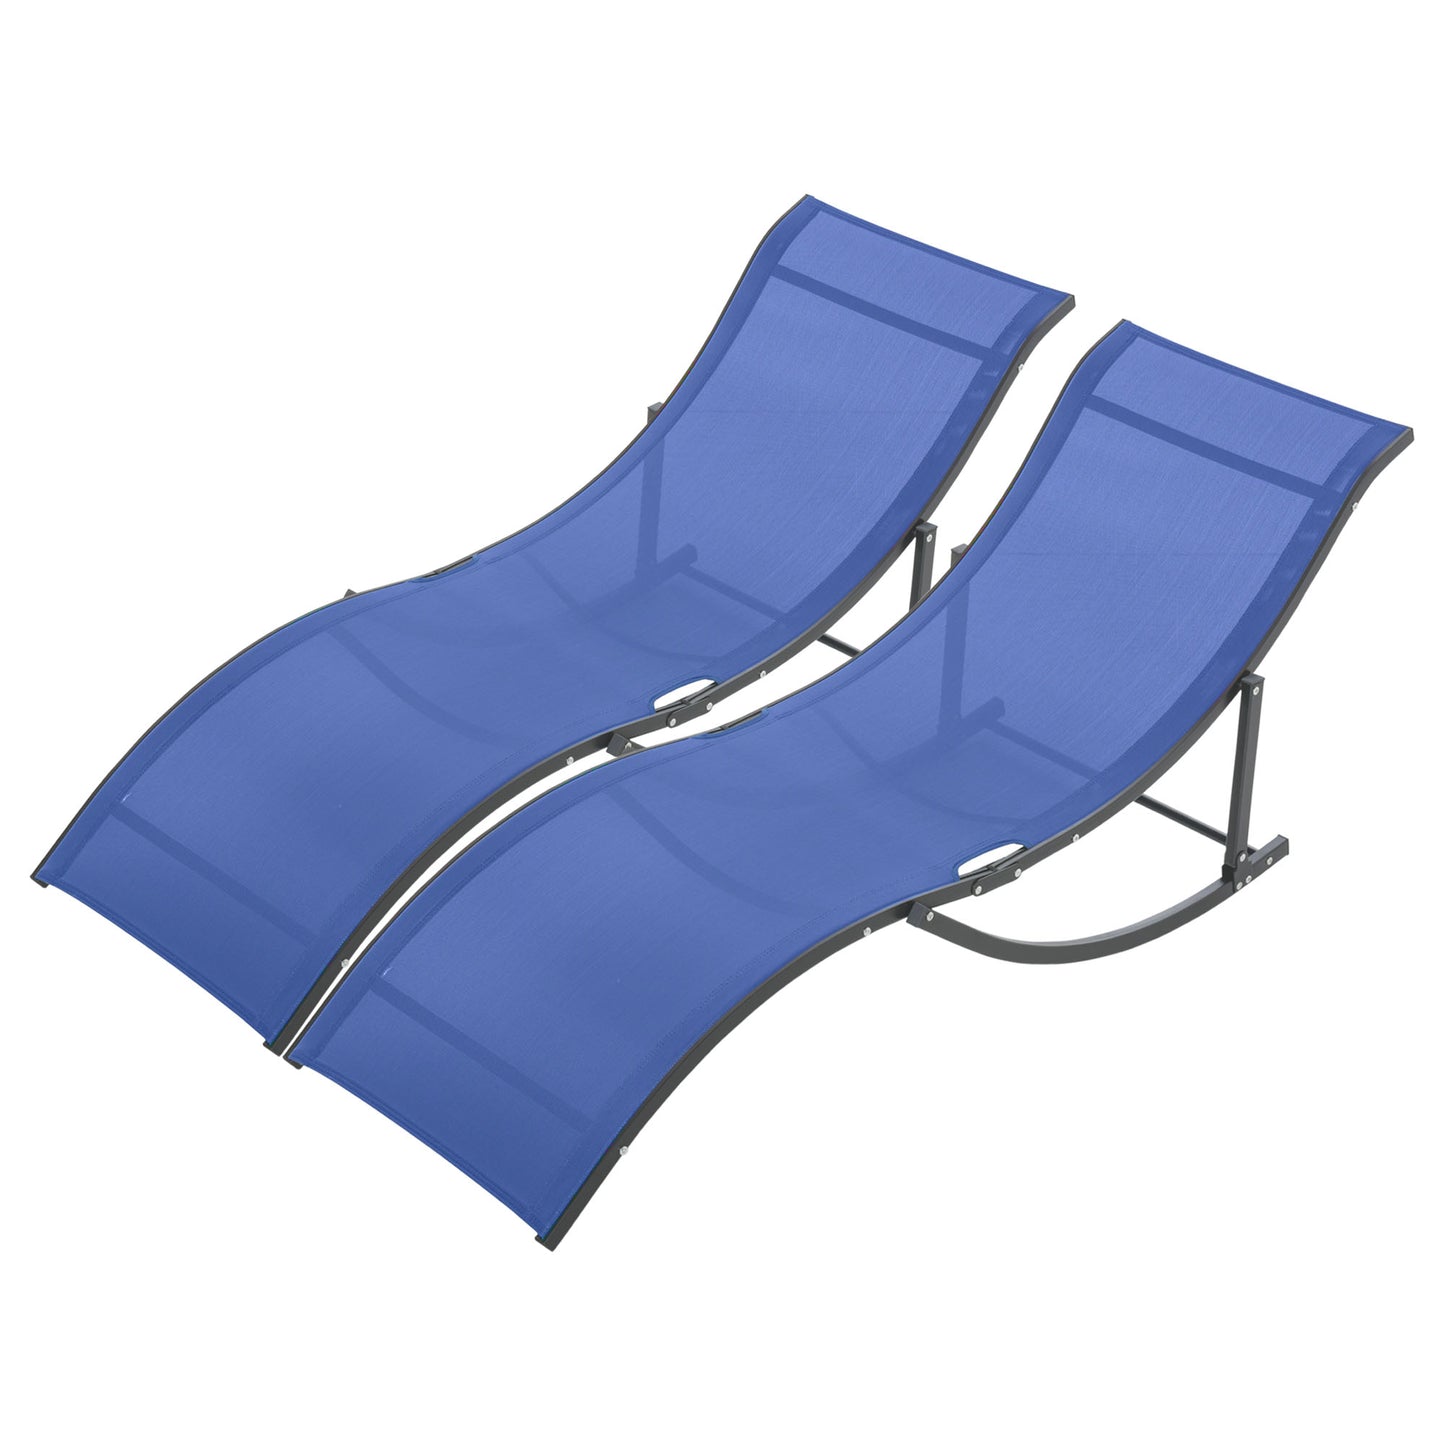 Outsunny Set of 2 S-shaped Lounge Chair Foldable Sleeping Bed 165x61x63cm Navy Blue